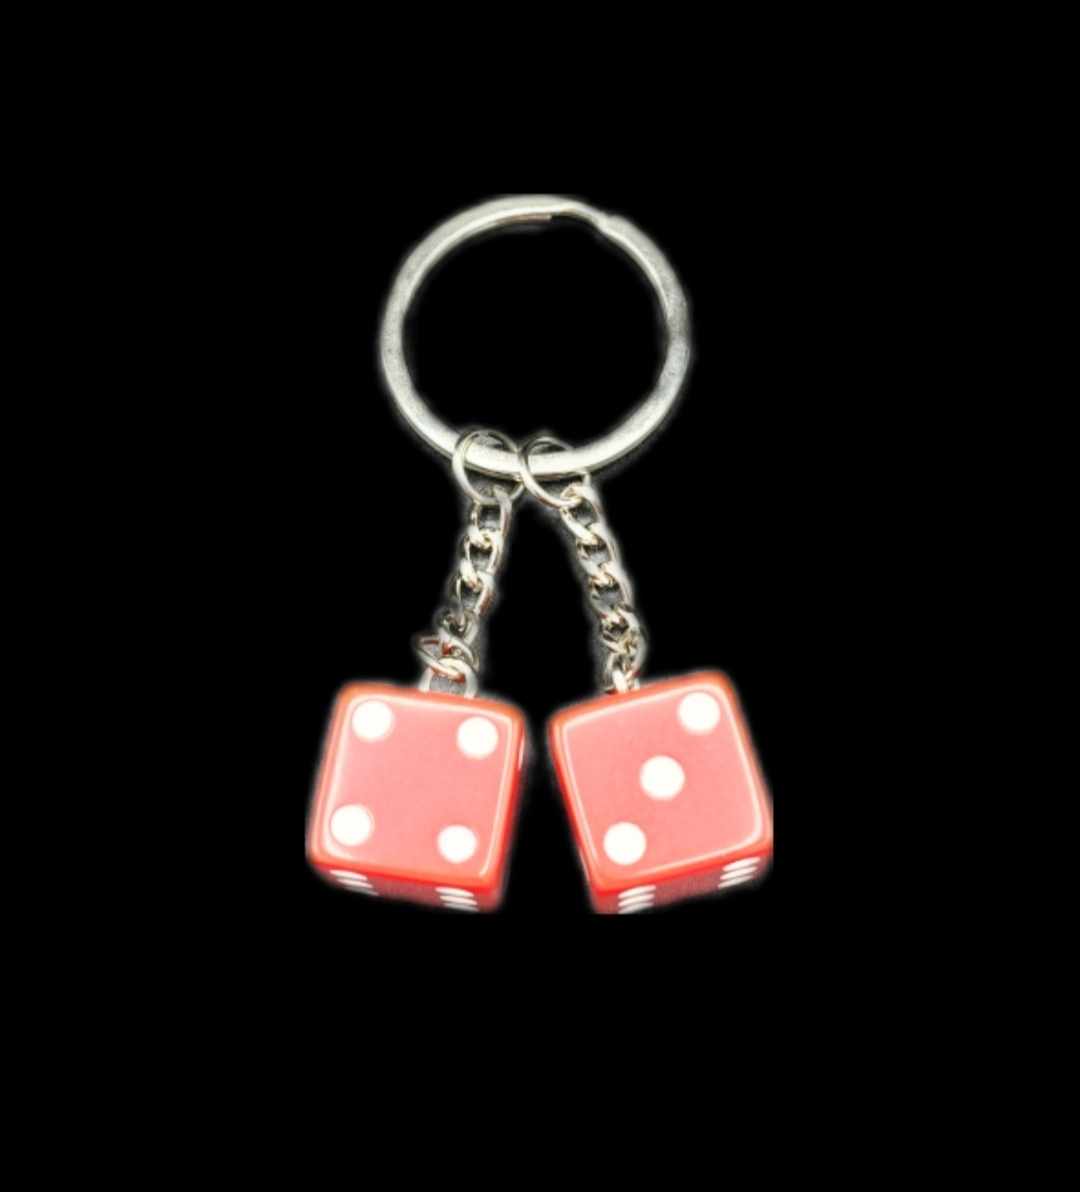 Dice Keychain – Side Action Gaming